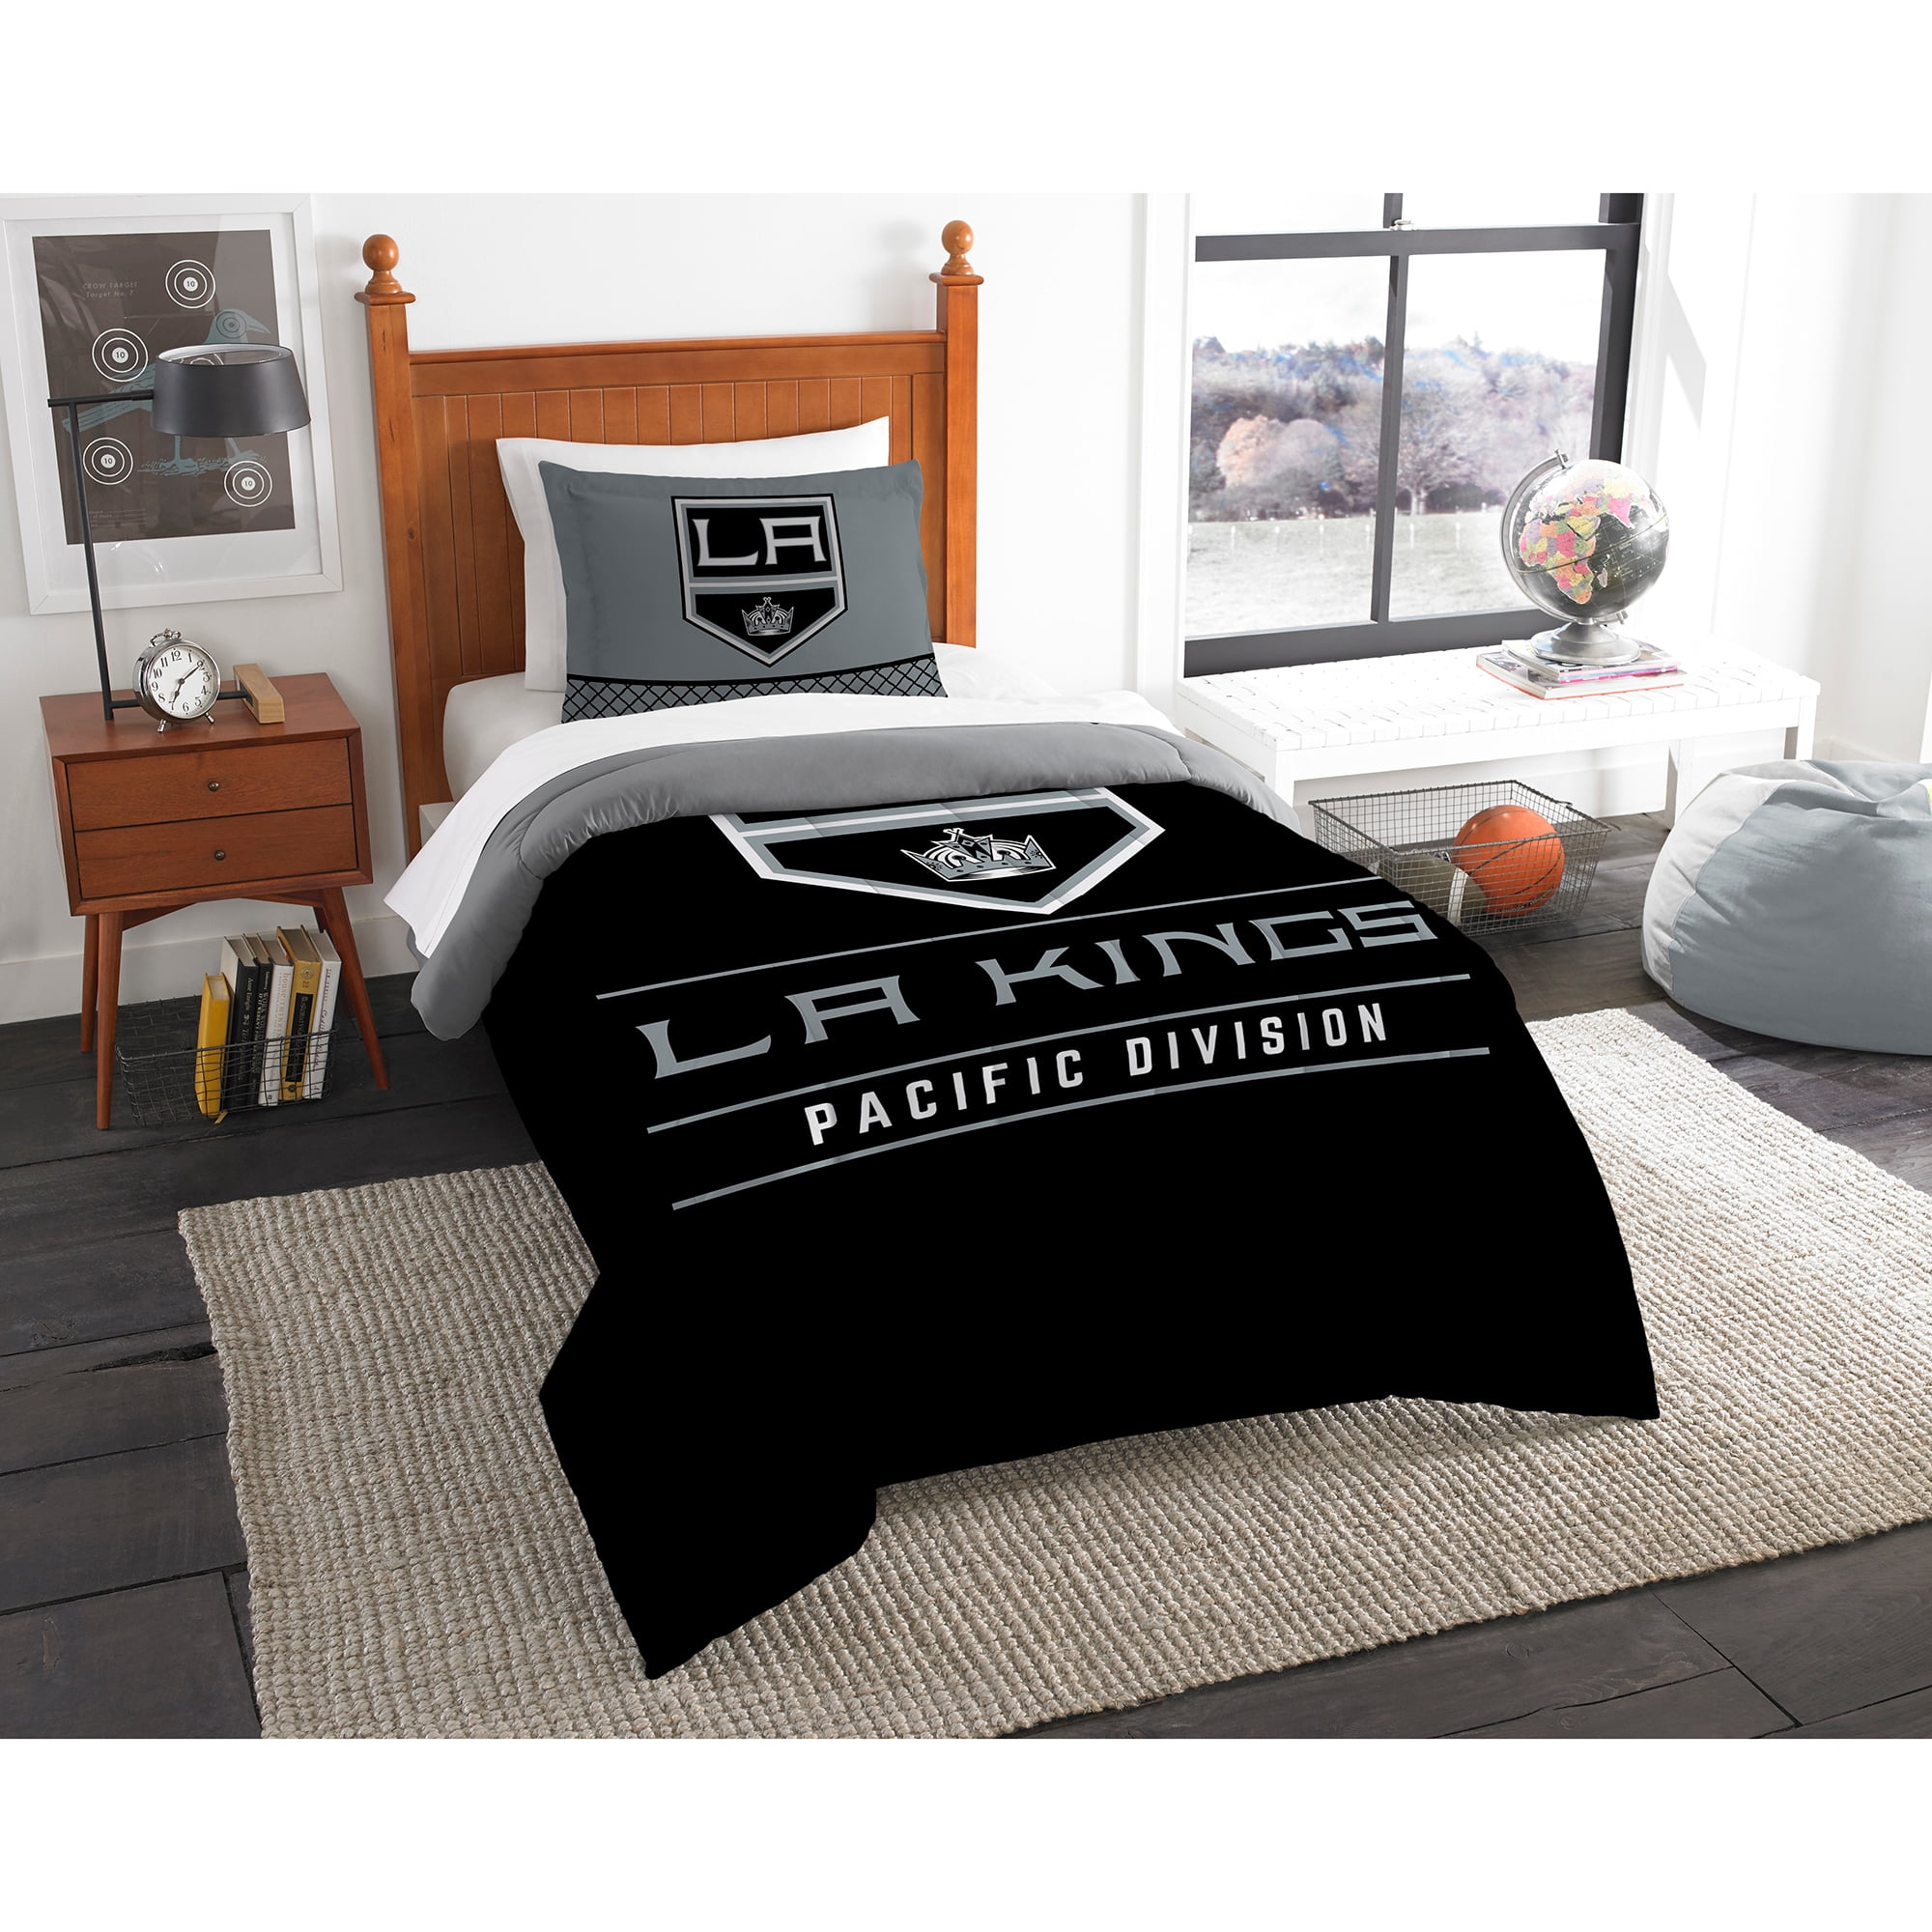 NHL Los Angeles Kings Bed In Bag Set, Queen Size, Team Colors, 100%  Polyester, 5 Piece Set